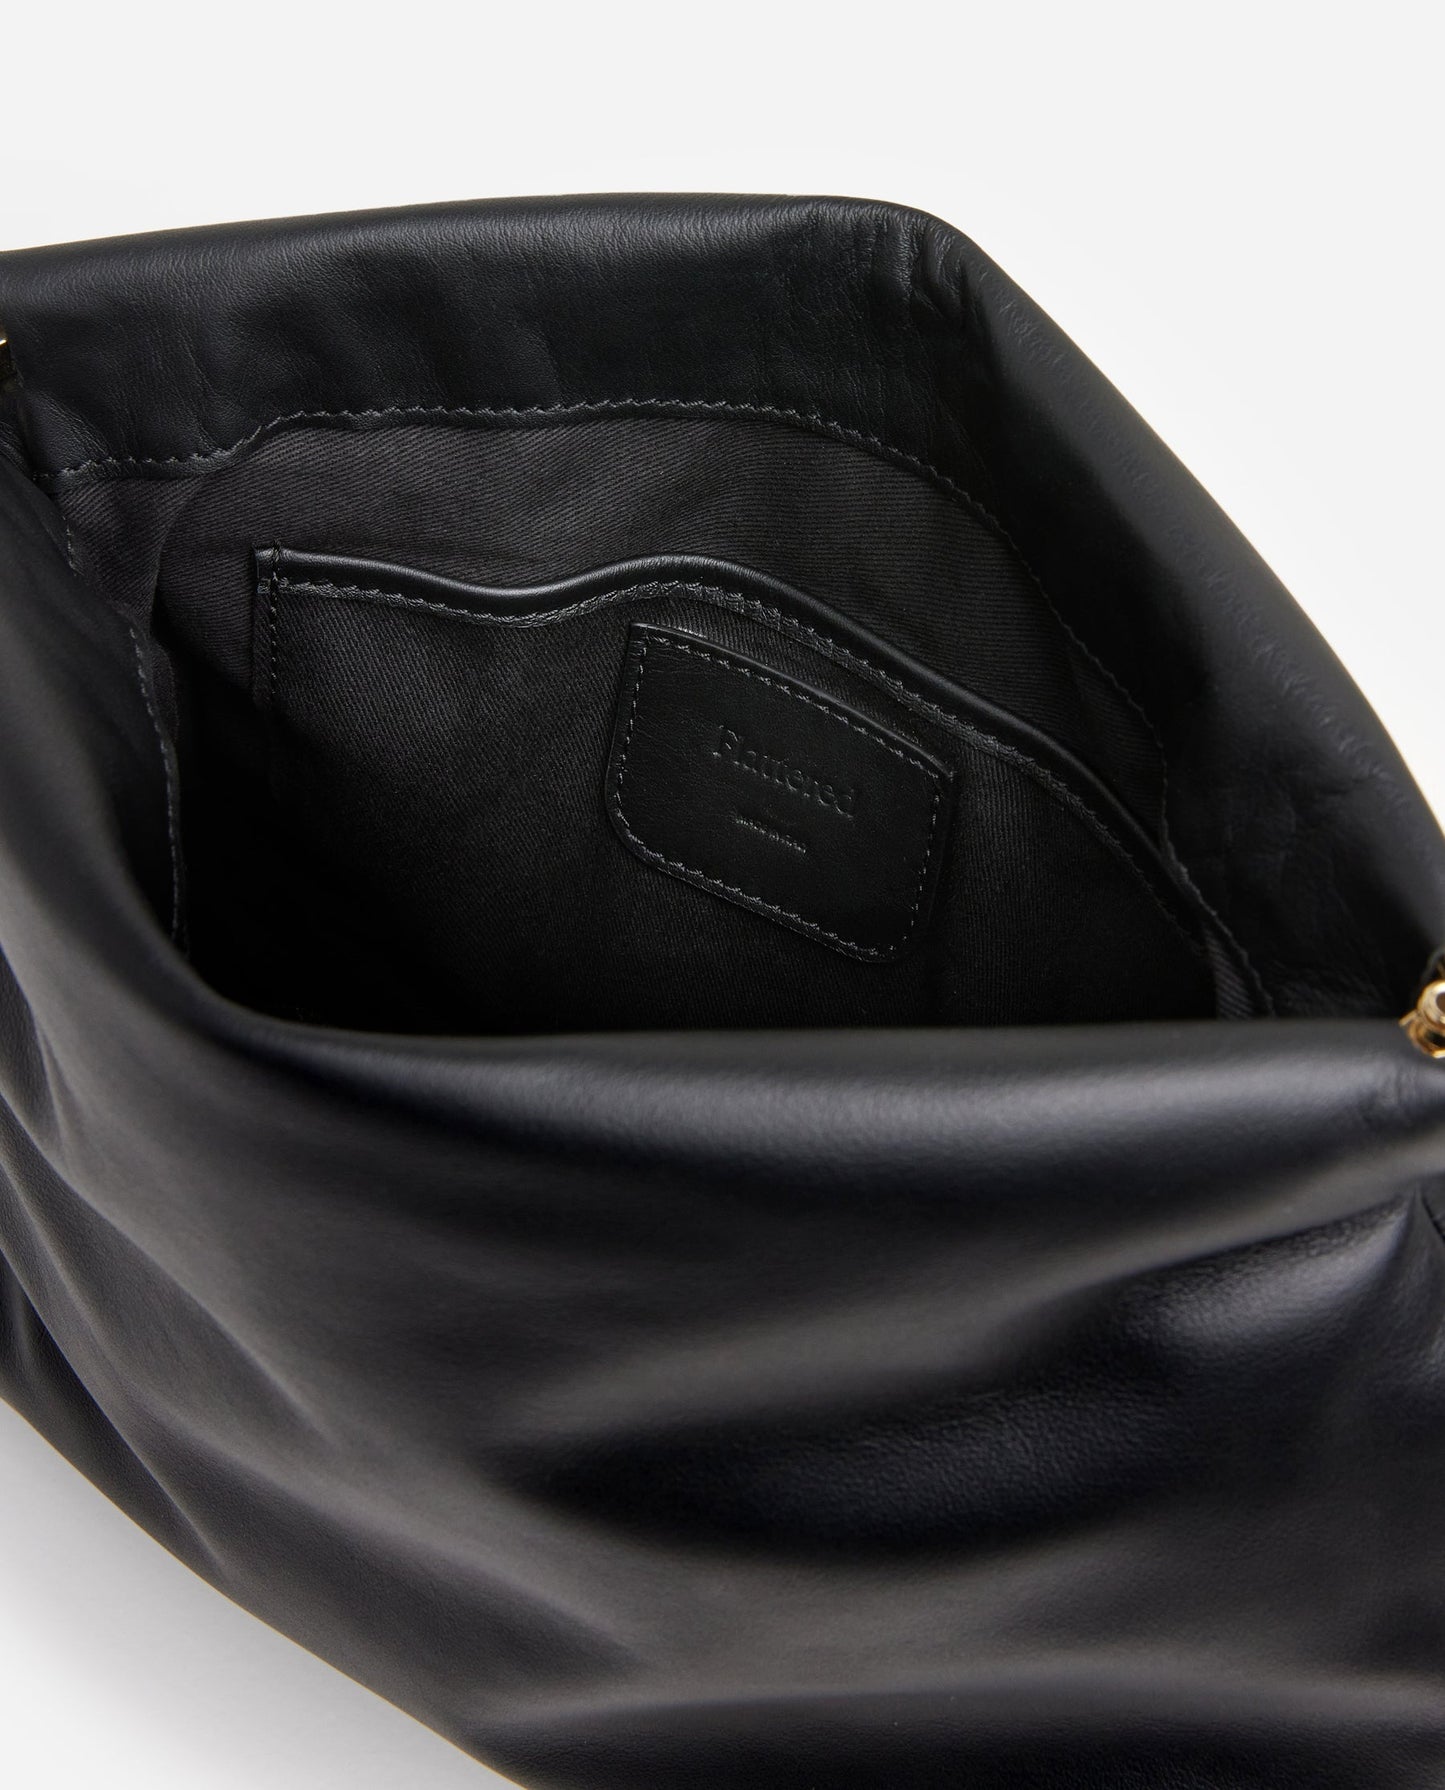 Clay Clutch Padded Black Leather